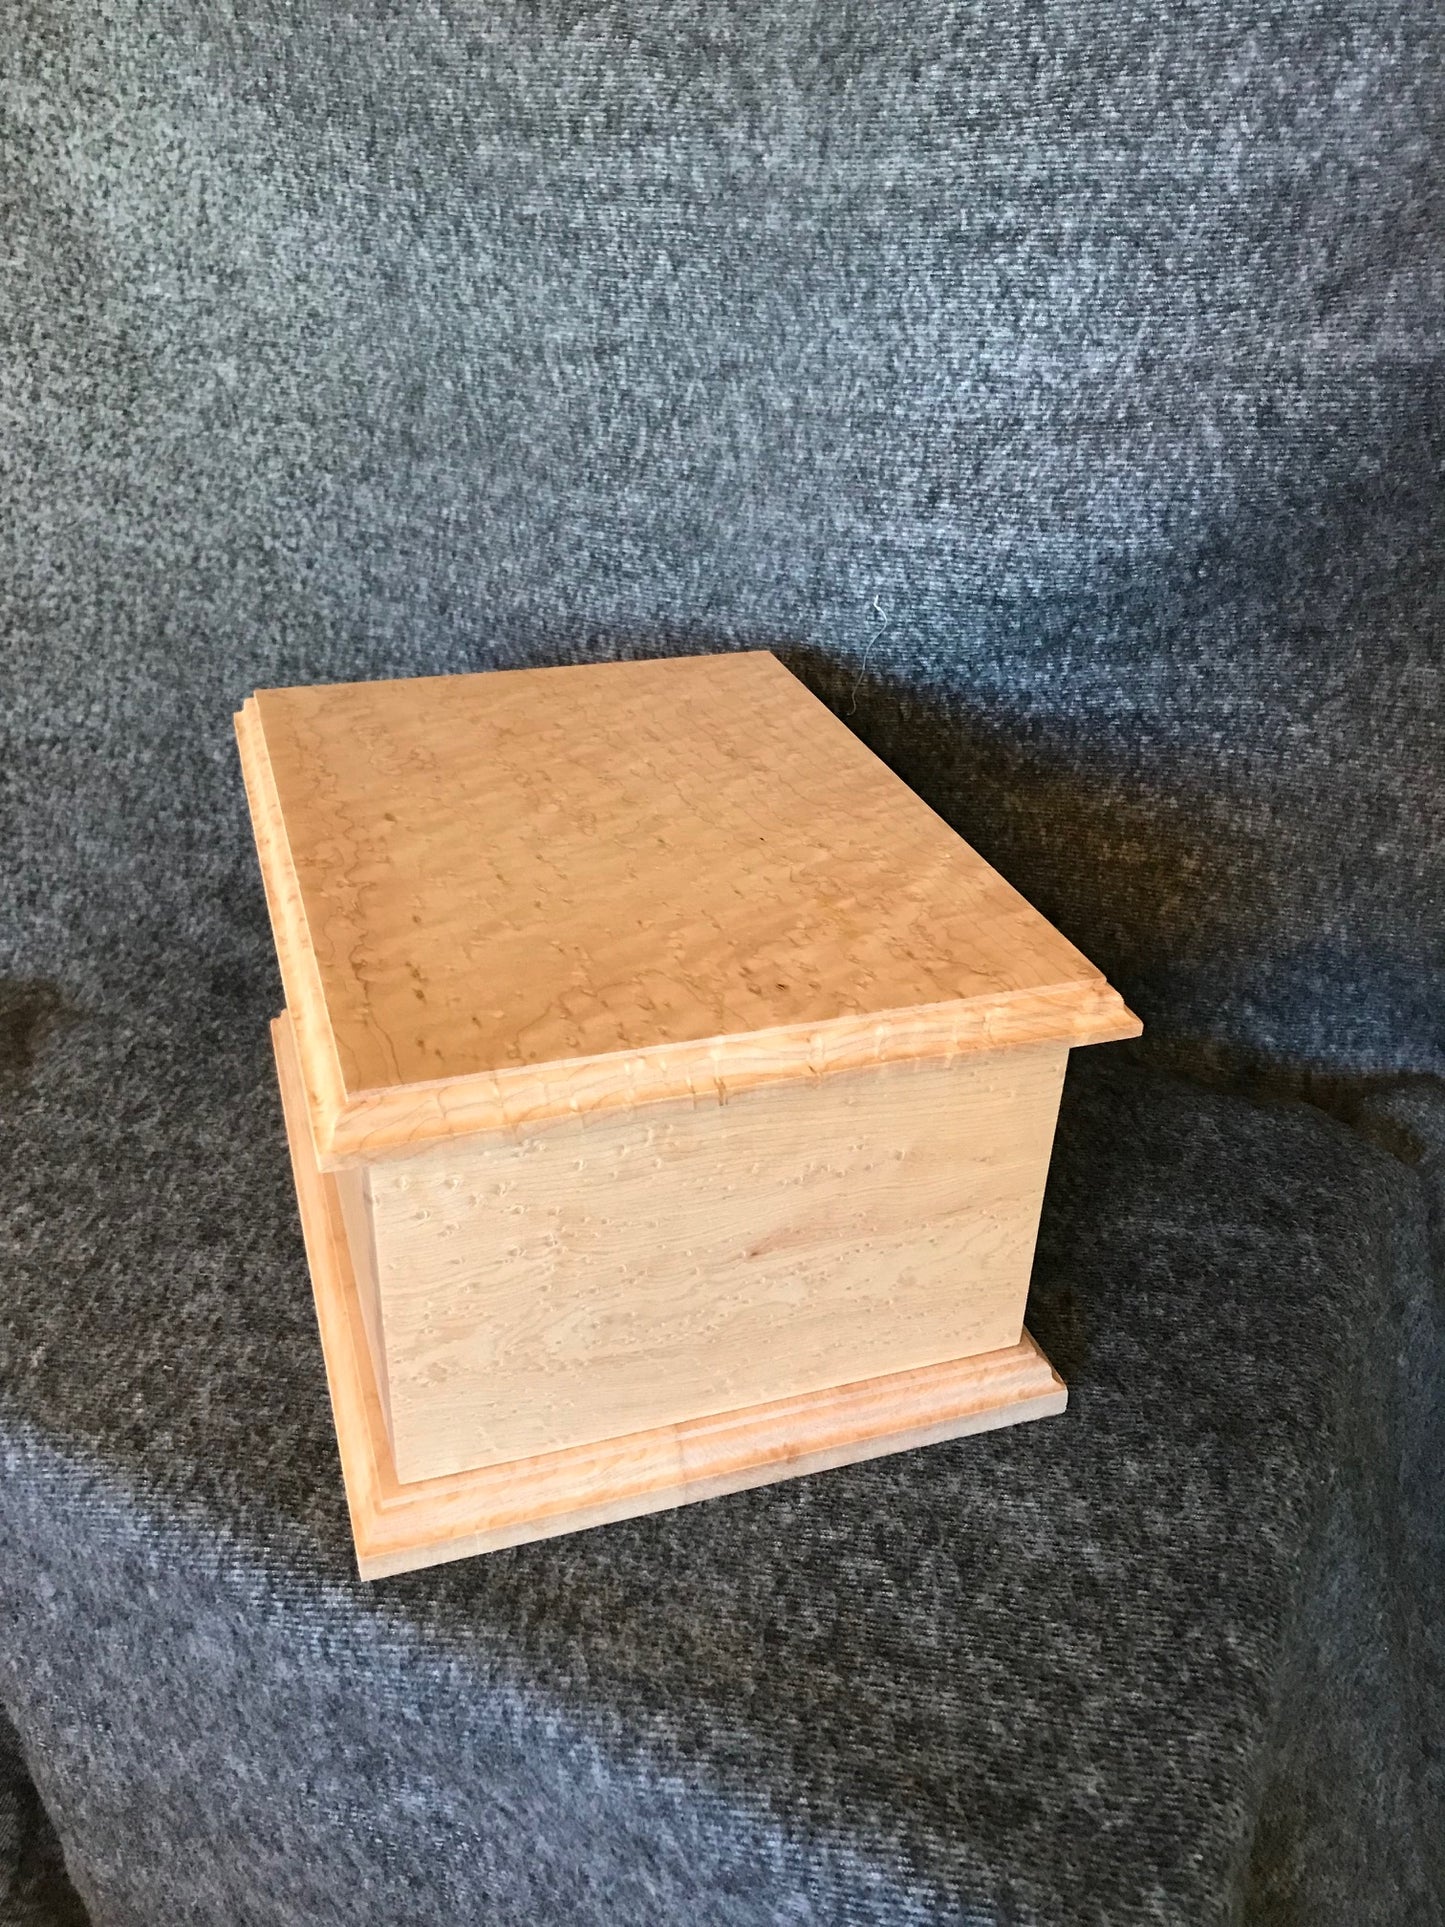 Birdseye Maple Dovetail Cremation Urn for Adult Human Ashes, up to 230 pounds